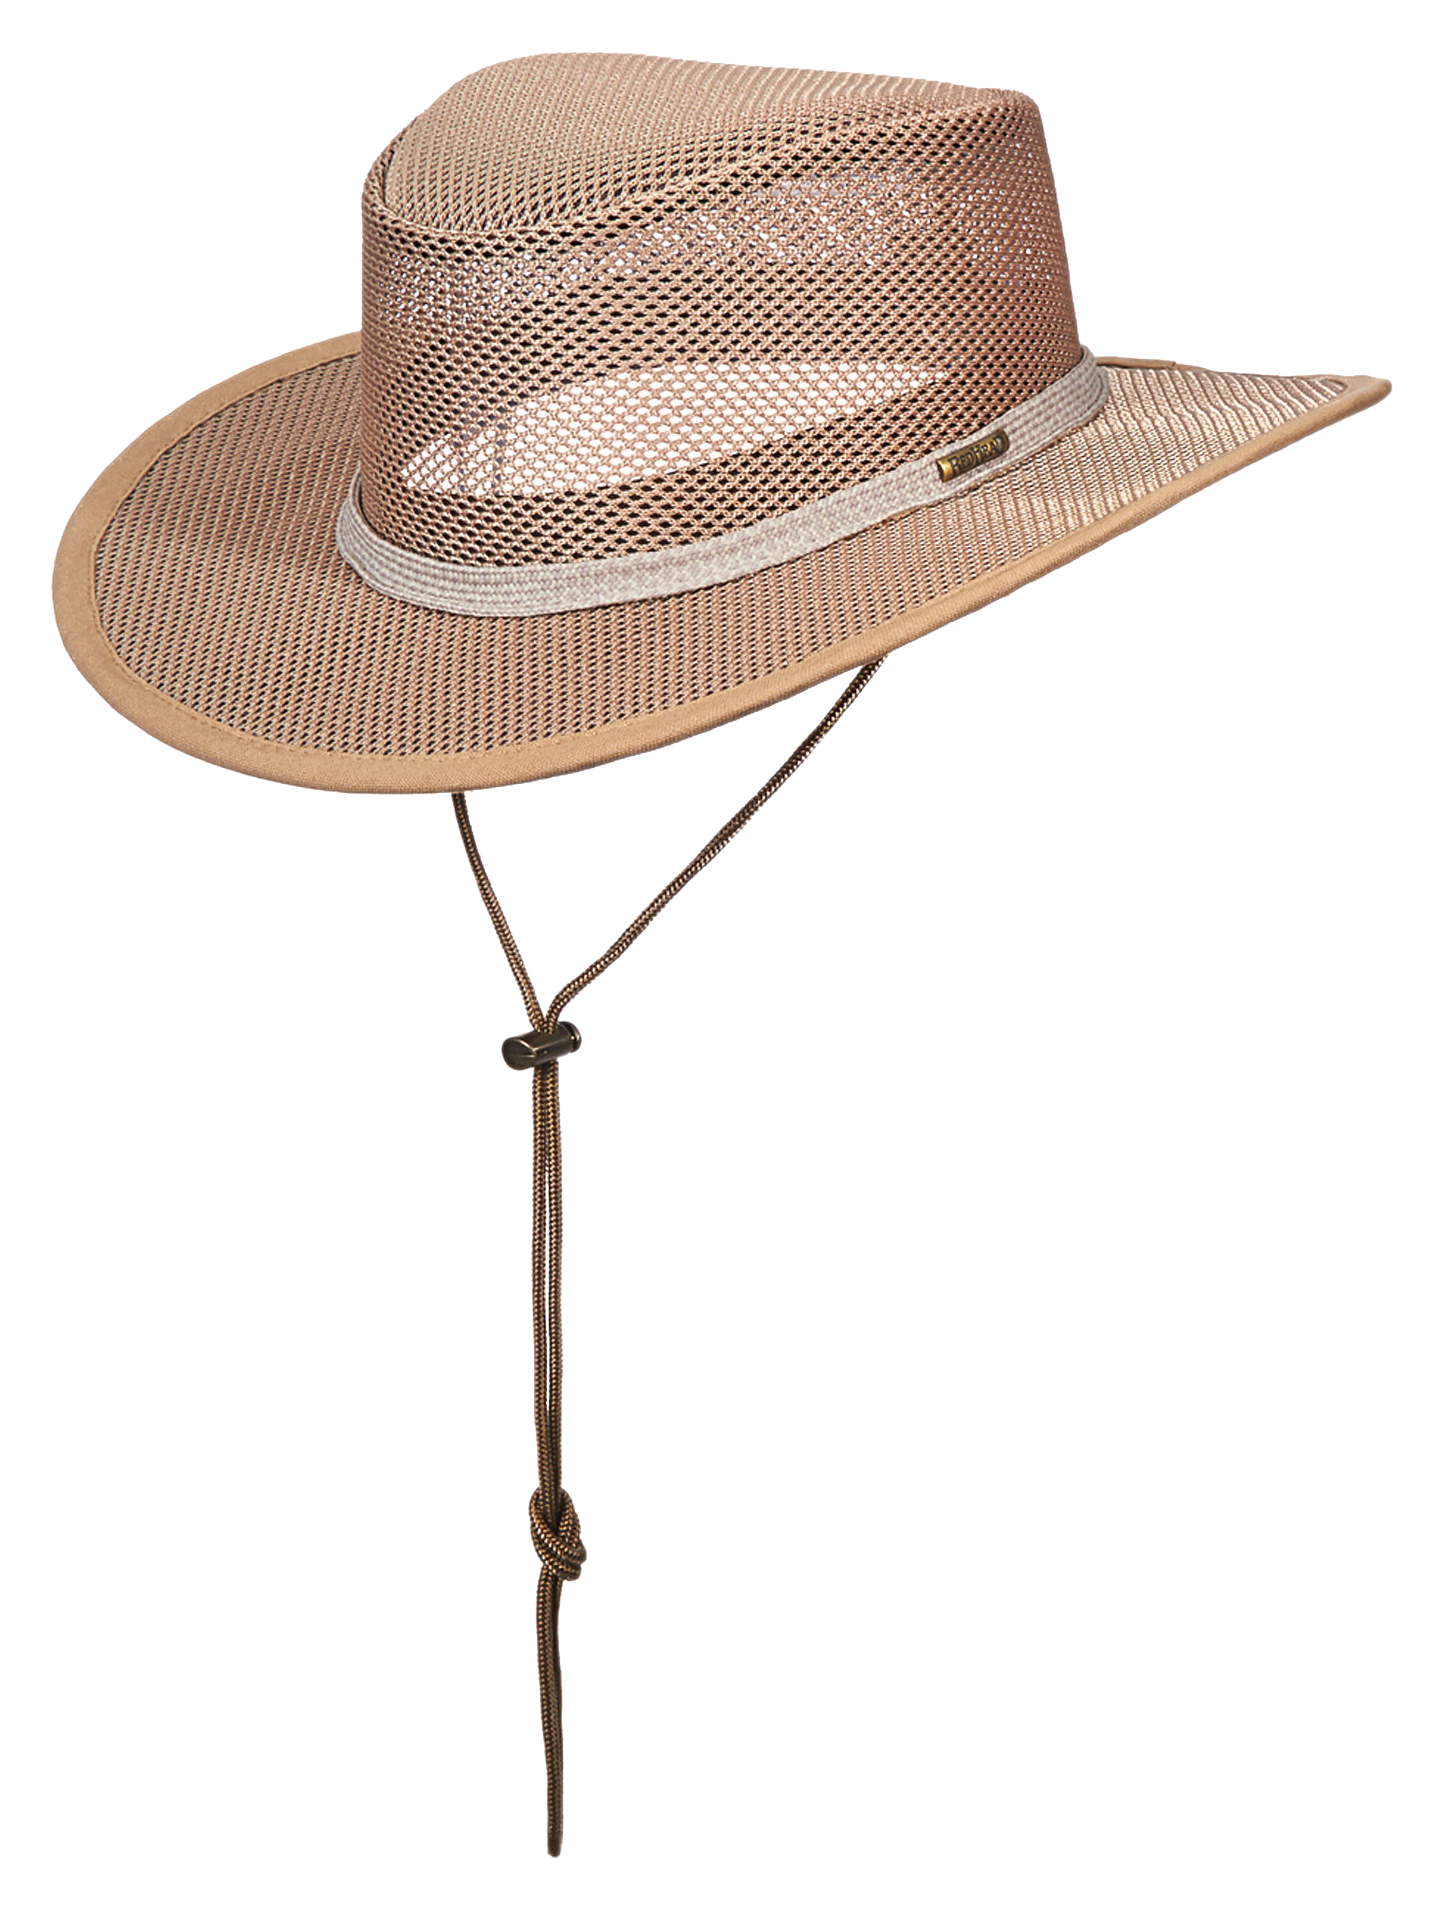 Redhead Coolmesh Outback Soaker Hat for Men - Clay - L